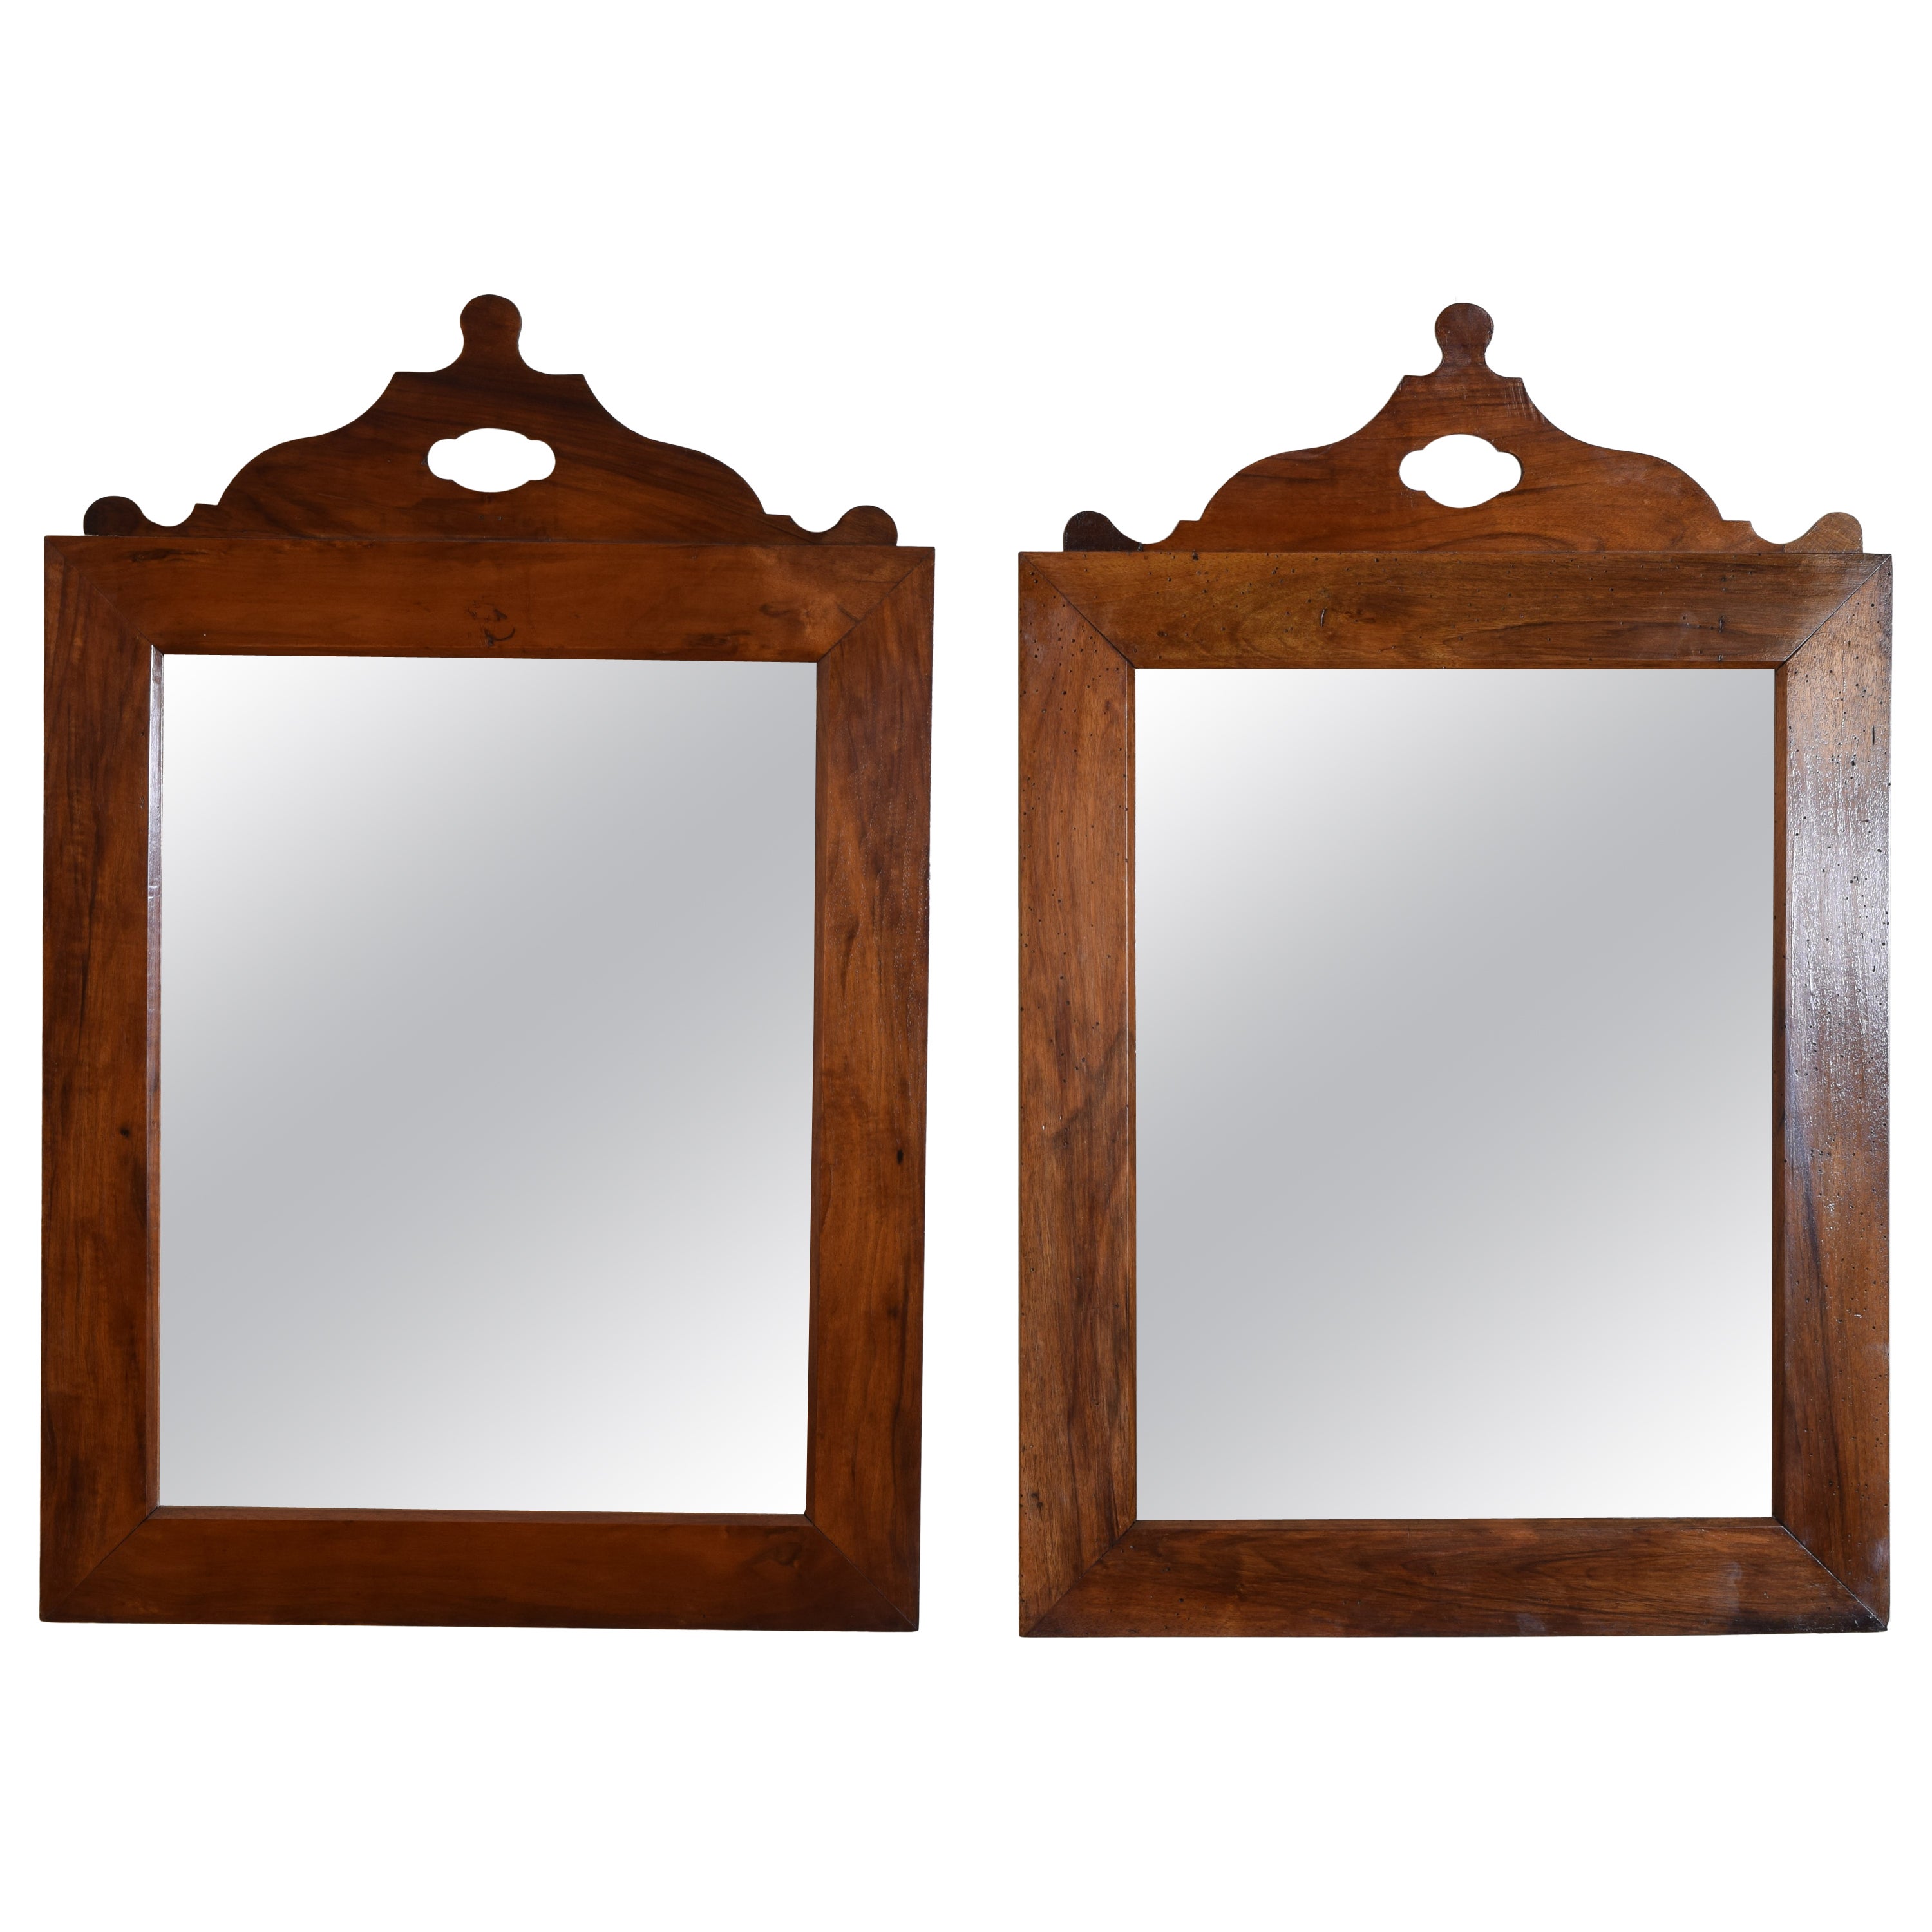 French Neoclassical Period Pair Shaped Walnut Mirrors, 2nd quarter 19th century